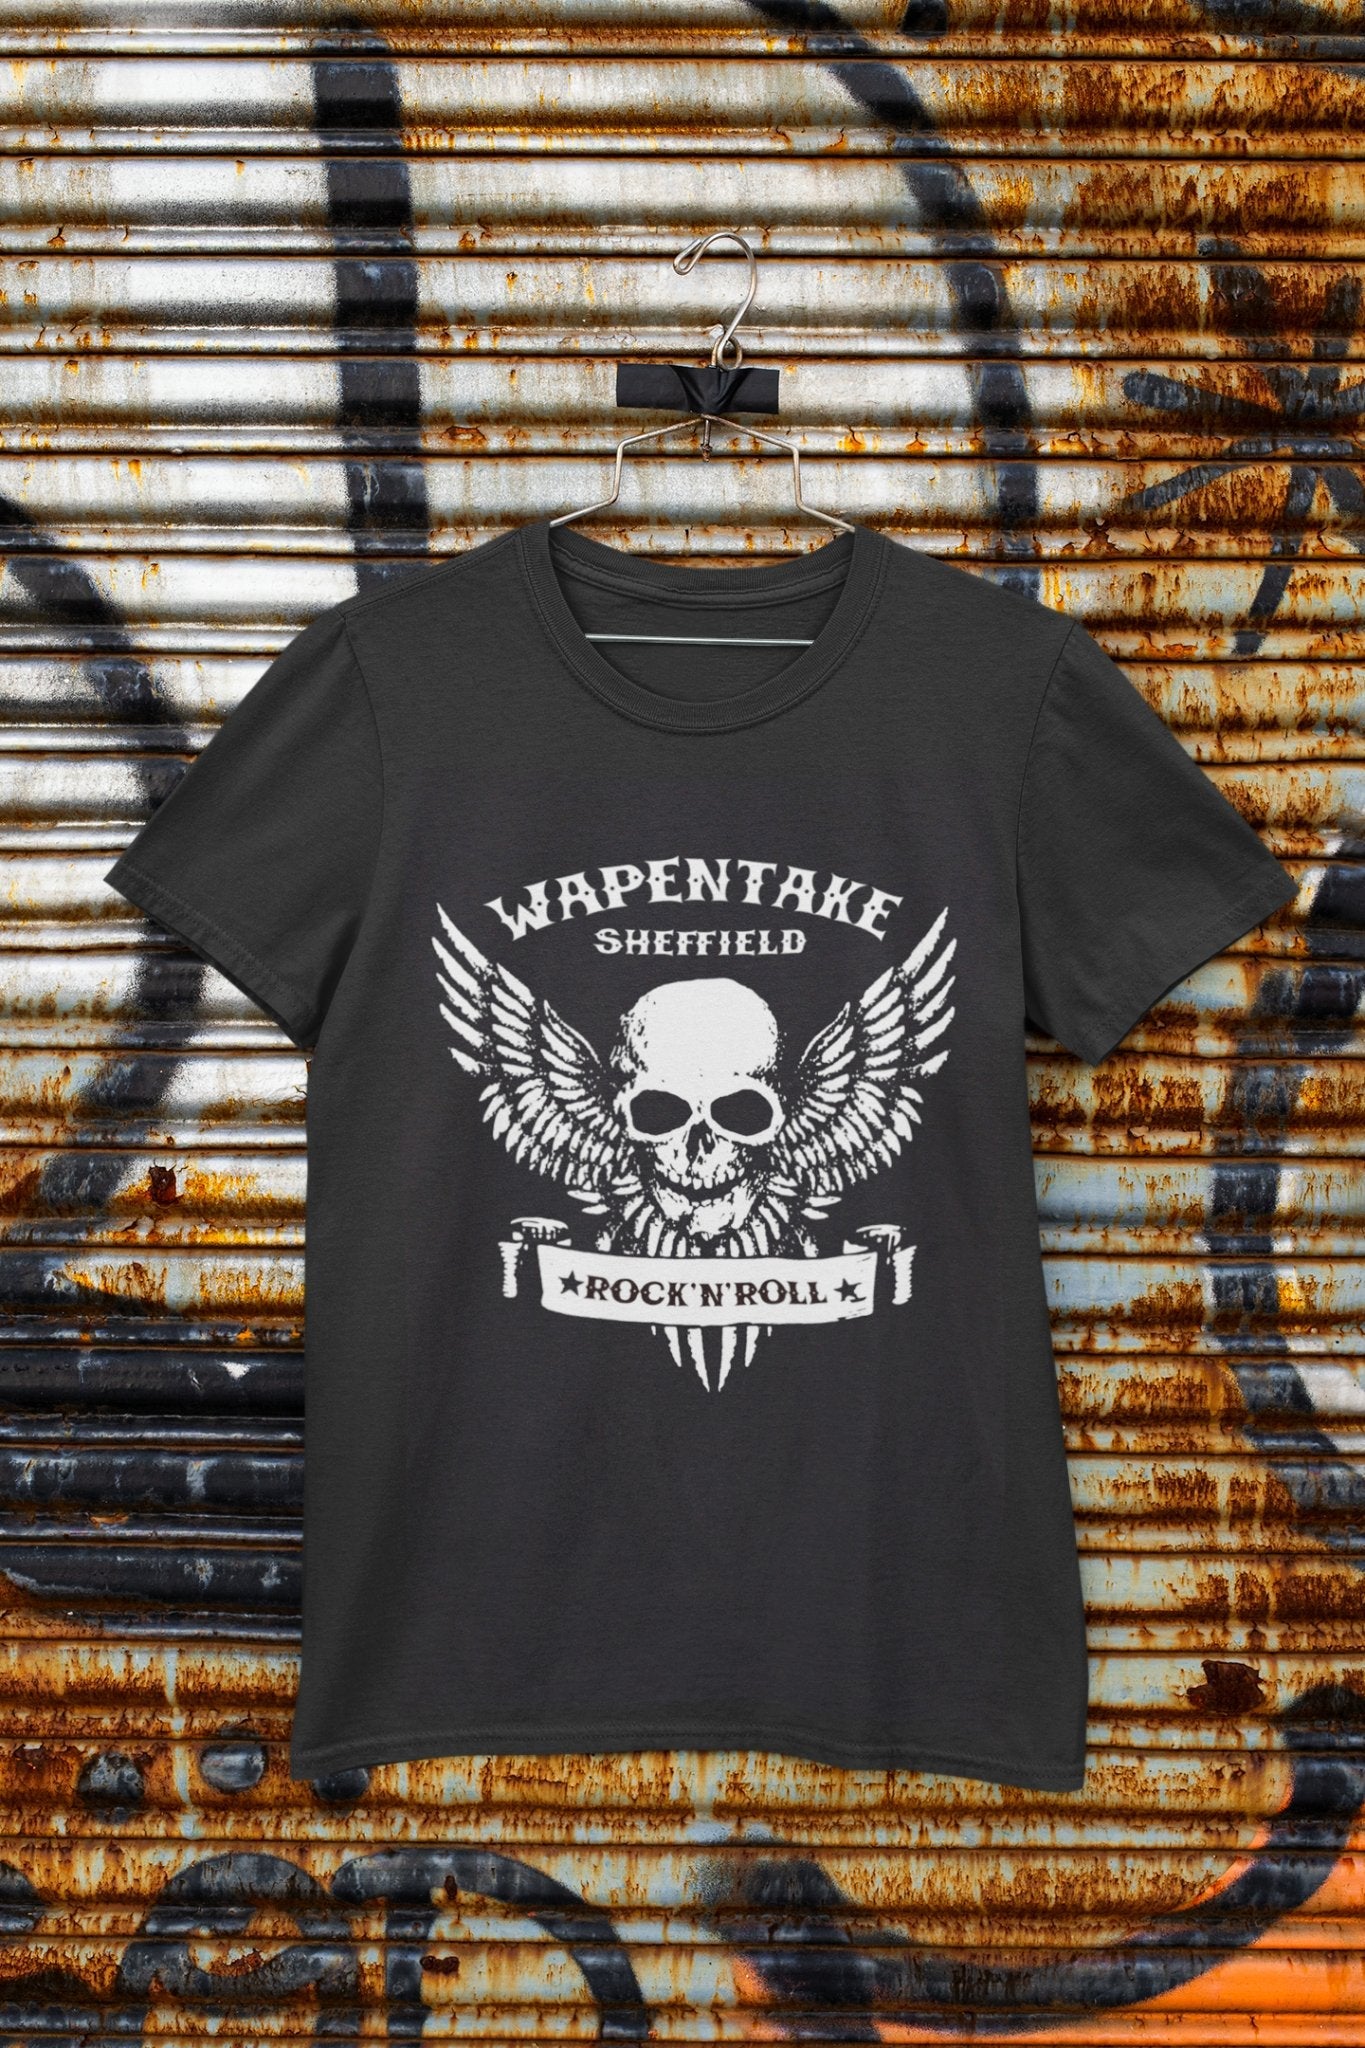 Sheffield t shirt - Wapentake skull/wings unisex fit T - shirt - re - discover your inner rock star - Dirty Stop Outs